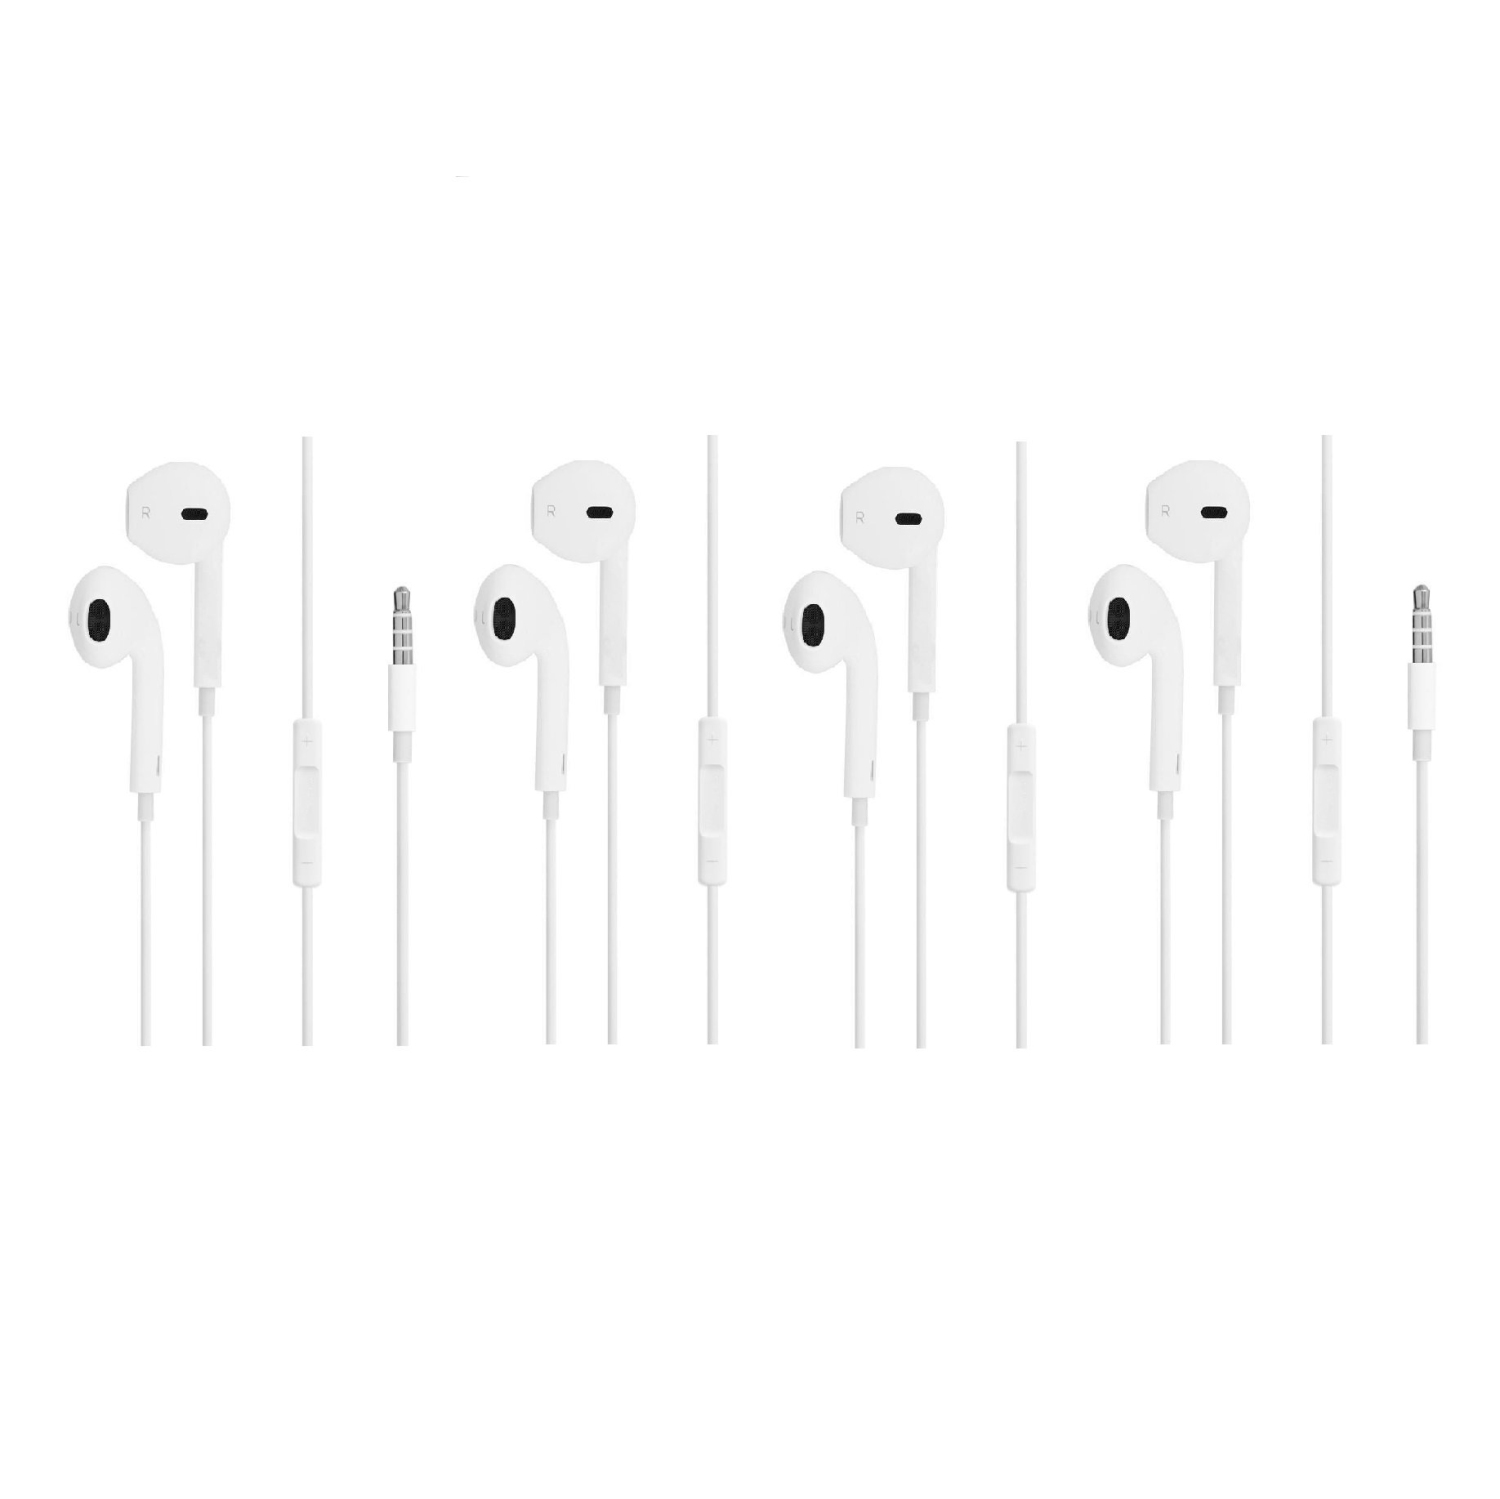 [4 Pack] iPhone Earbuds Headphones Earphones with 3.5mm Wired in Ear Headphone Plug, Built-in Microphone & Volume Cont